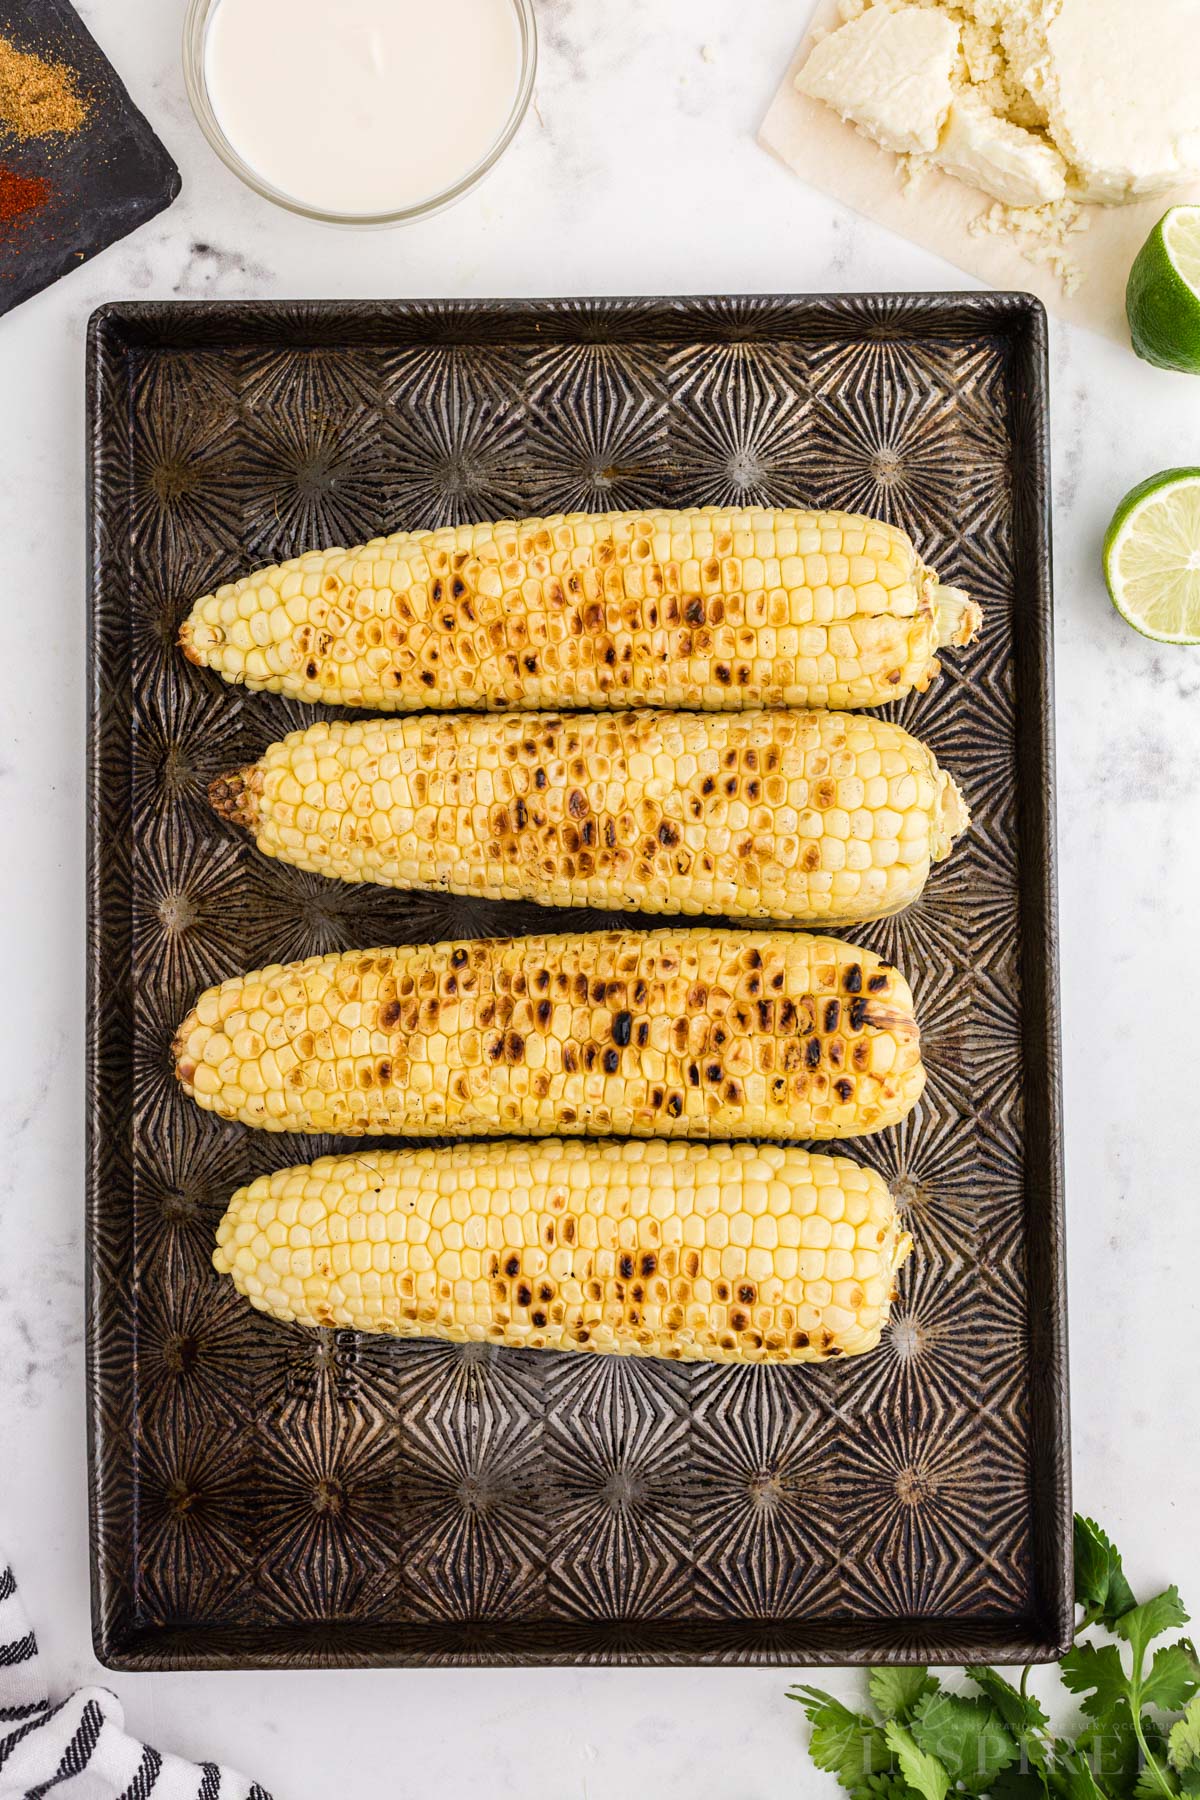 Ears of corn with charred marks on baking sheet, Mexican street corn sauce ingredients set nearby.